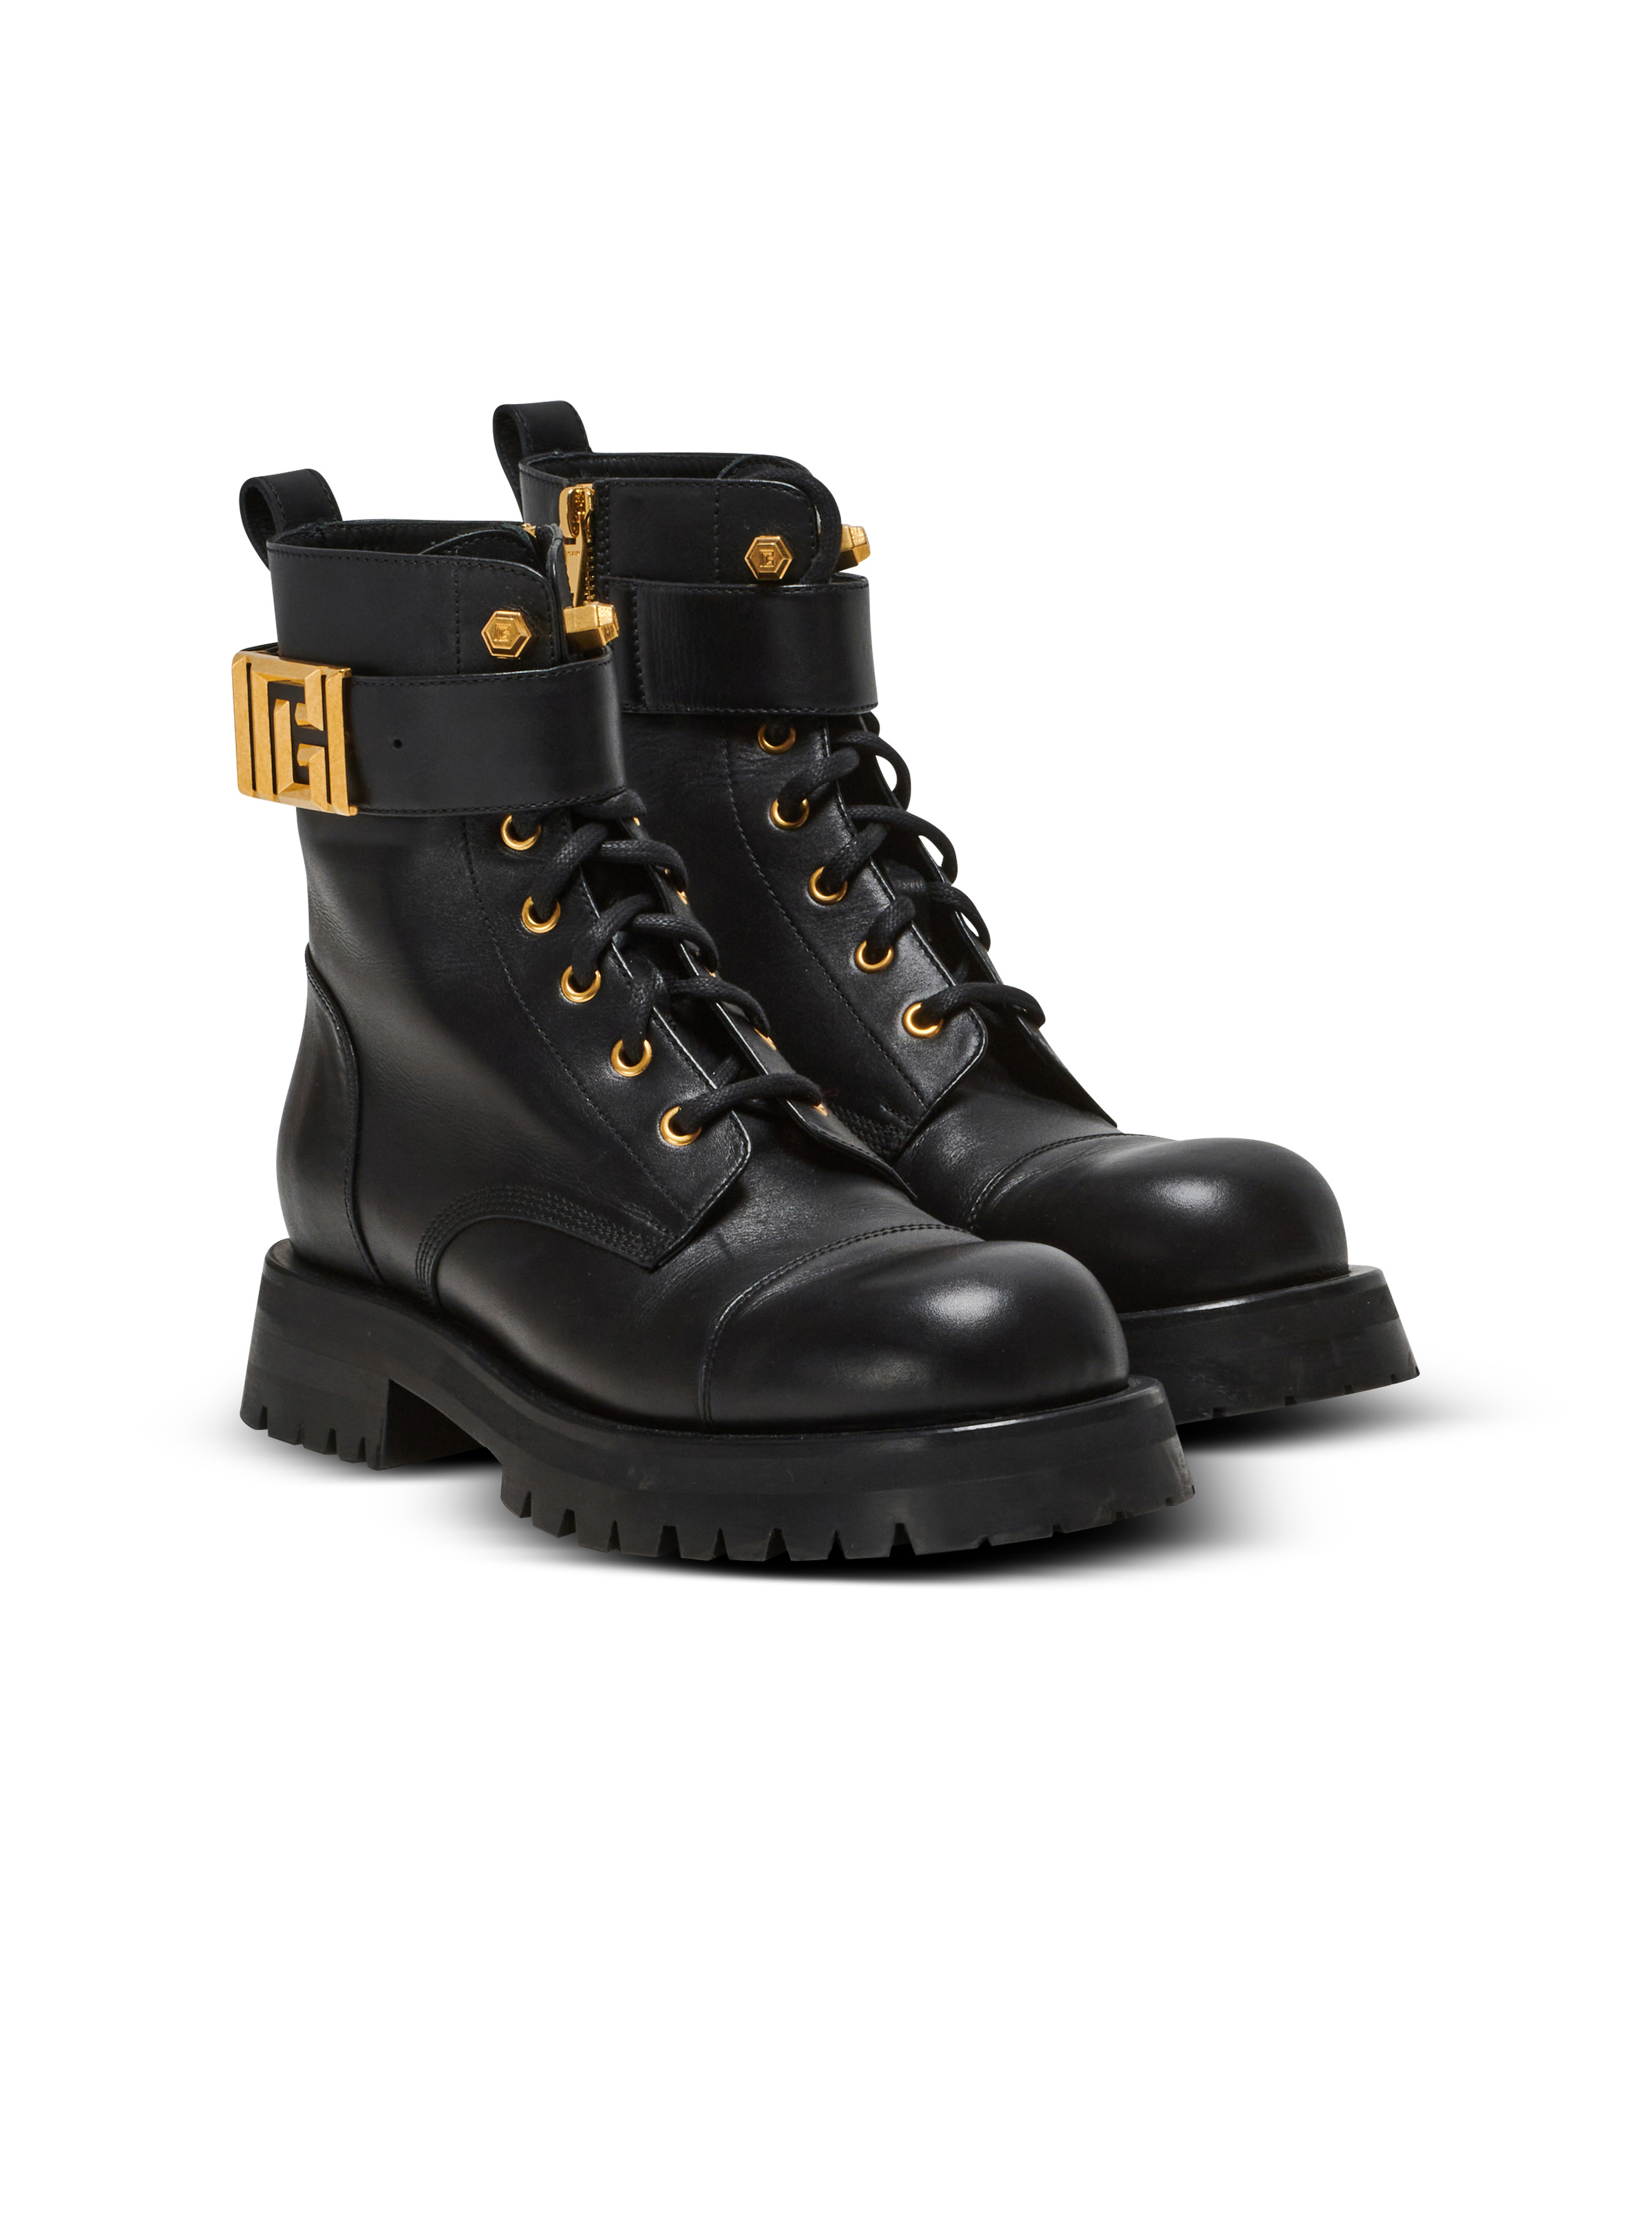 Charlie leather ranger boots - 2